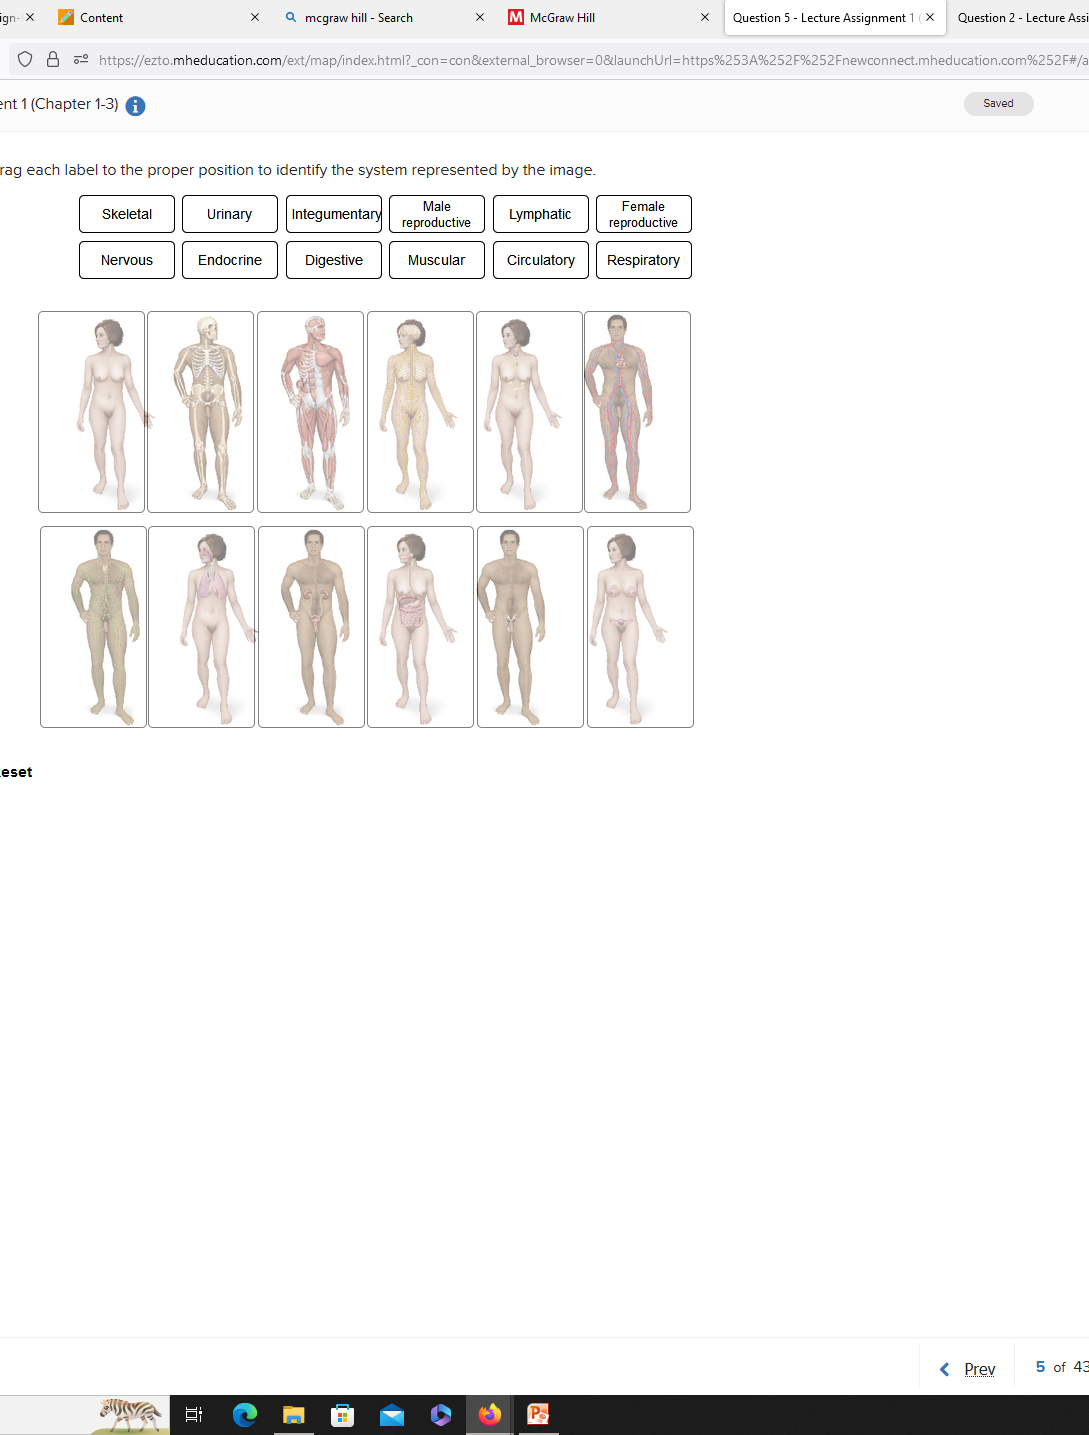 gn-X
Content
eset
Skeletal
Nervous
X
rag each label to the proper position to identify the system represented by the image.
Male
reproductive
JUNA
8 https://ezto.mheducation.com/ext/map/index.html?_con=con&external_browser=0&launch Url=https%253A%252F%252Fnewconnect.mheducation.com%252F#/a
ent 1 (Chapter 1-3) i
Qmcgraw hill - Search
91
Endocrine
Urinary Integumentary
X
Digestive
McGraw Hill
Muscular
Female
reproductive
Circulatory Respiratory
Lymphatic
X Question 5 - Lecture Assignment 1 (X
Po
Question 2 - Lecture Assi
Saved
< Prev
5 of 43